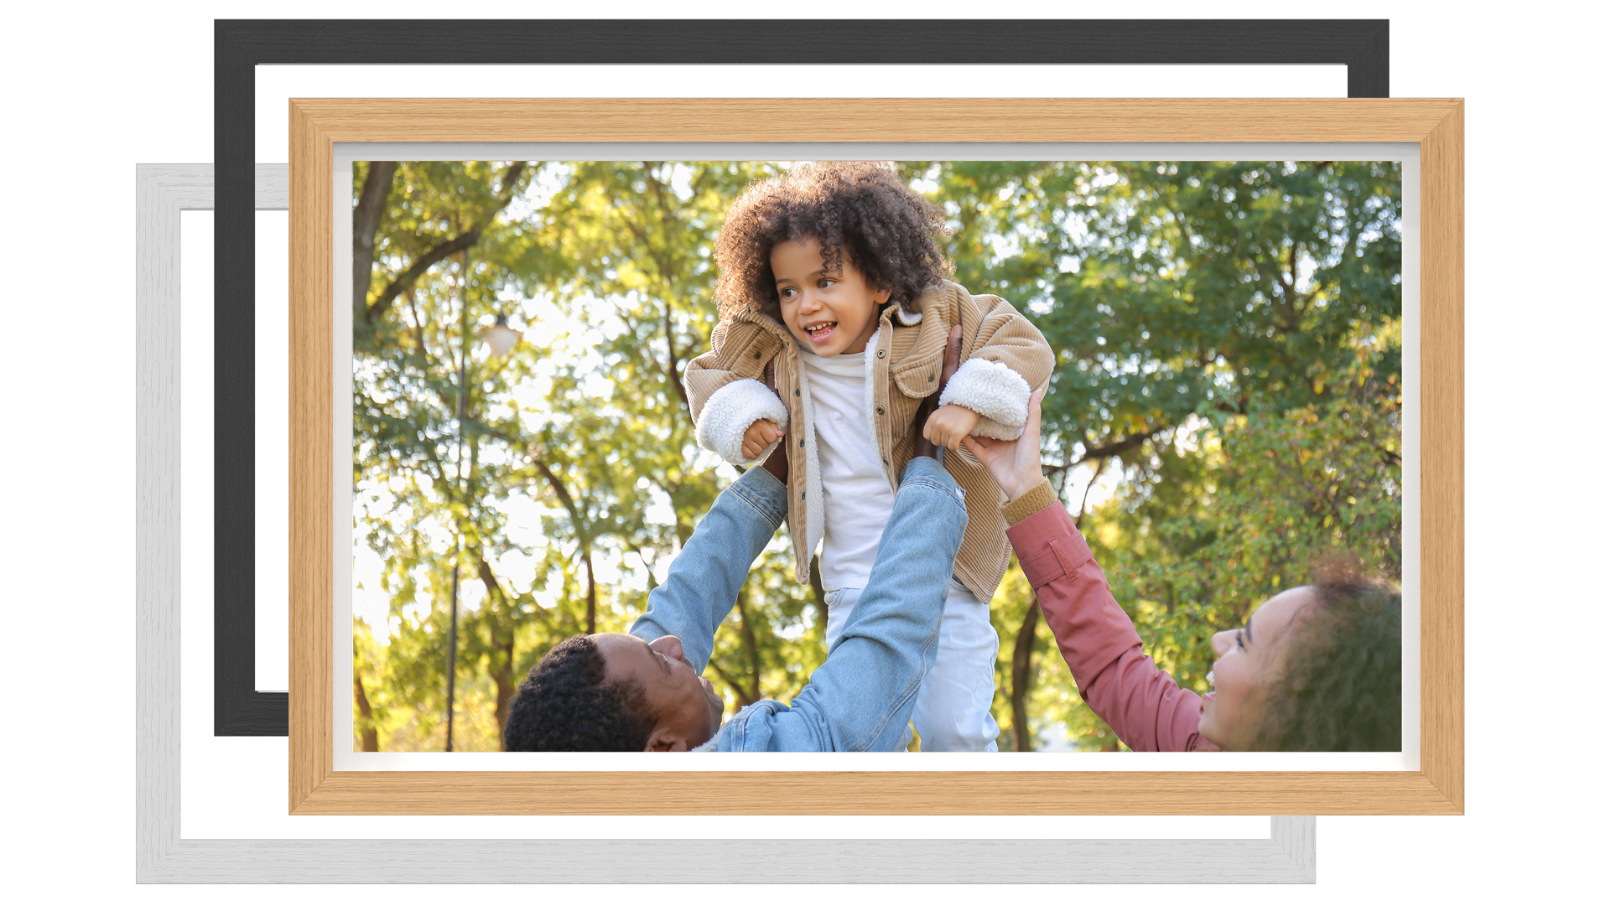 Multi Photo Picture Frame Holds 6 7x5 Photos in a 30mm Oak Veneer Frame 